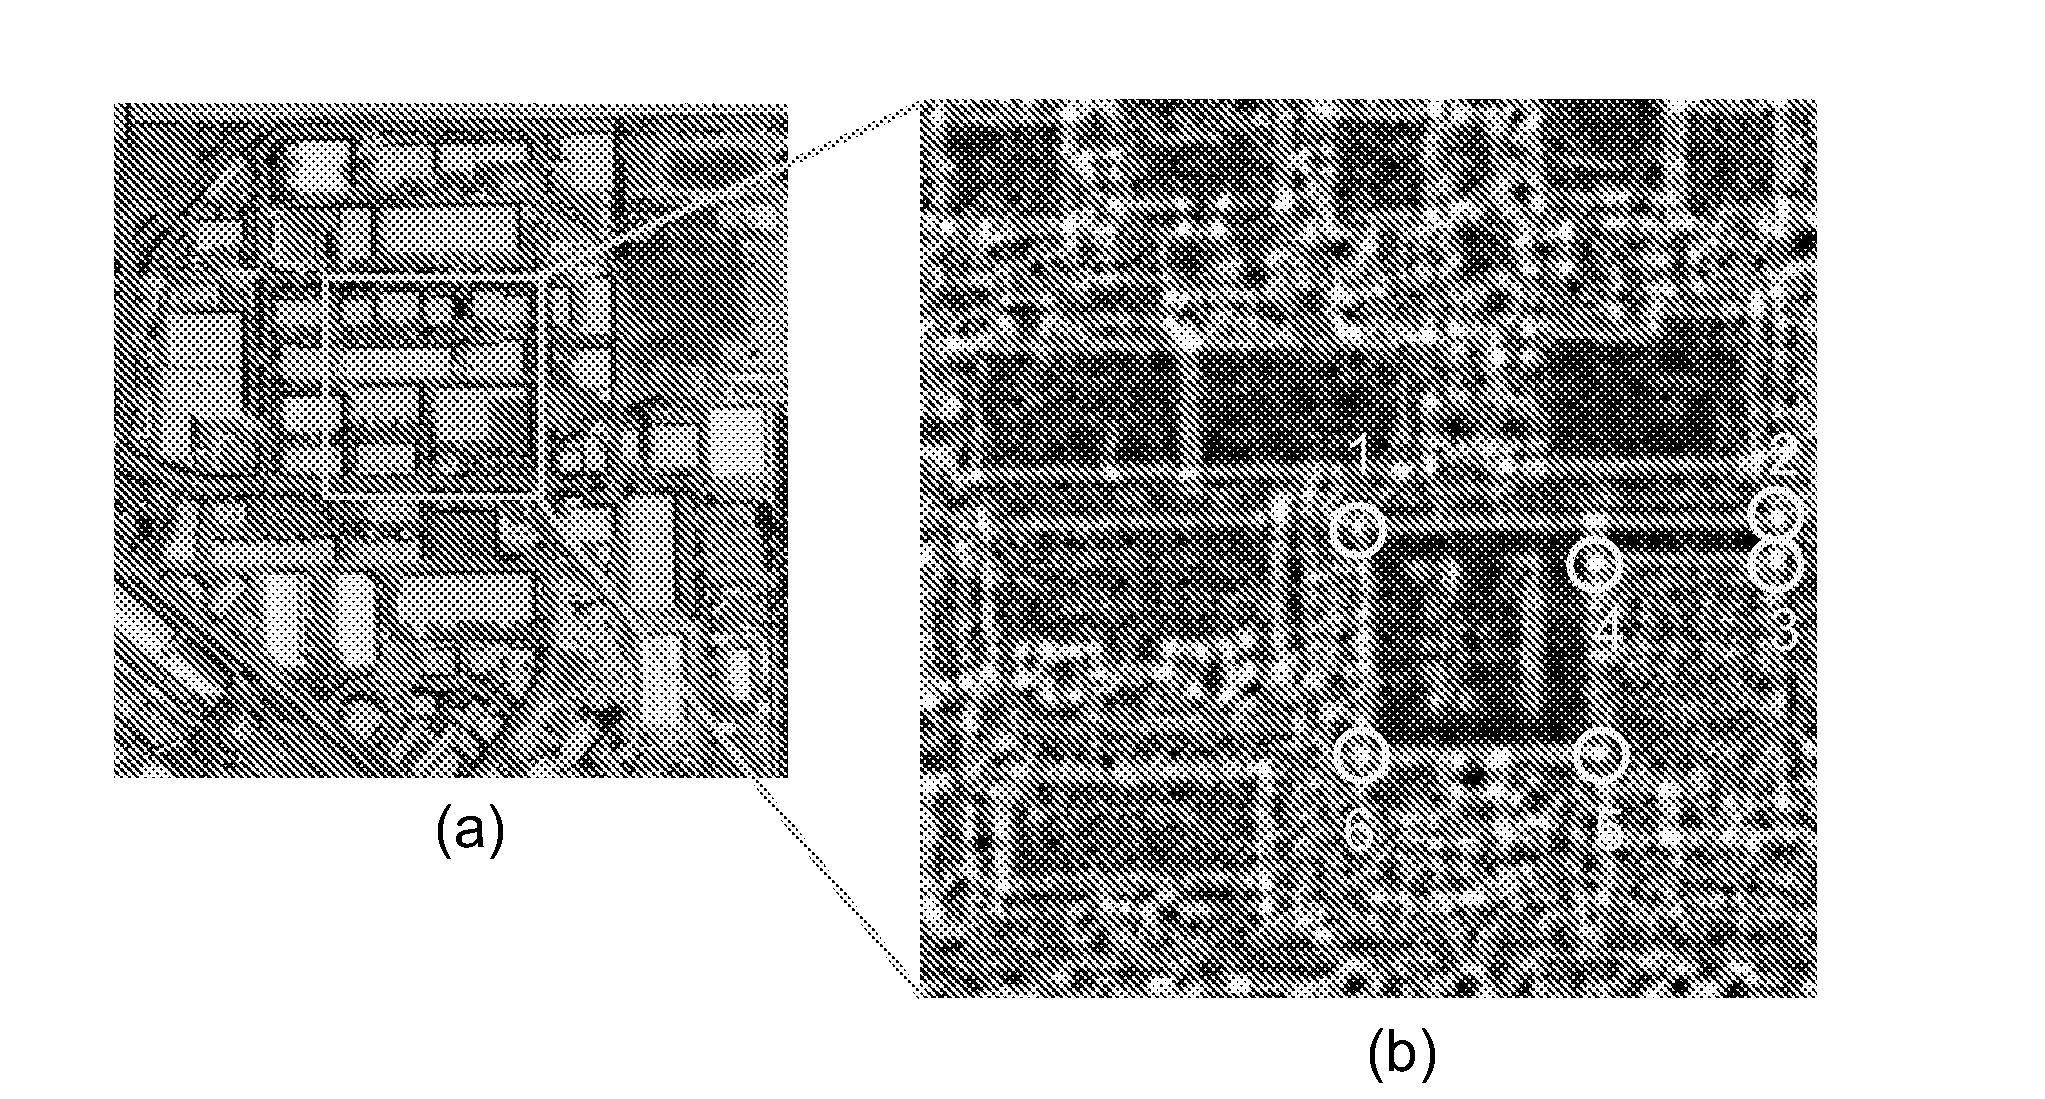 Method and System for detecting polygon Boundaries of structures in images as particle tracks through fields of corners and pixel gradients